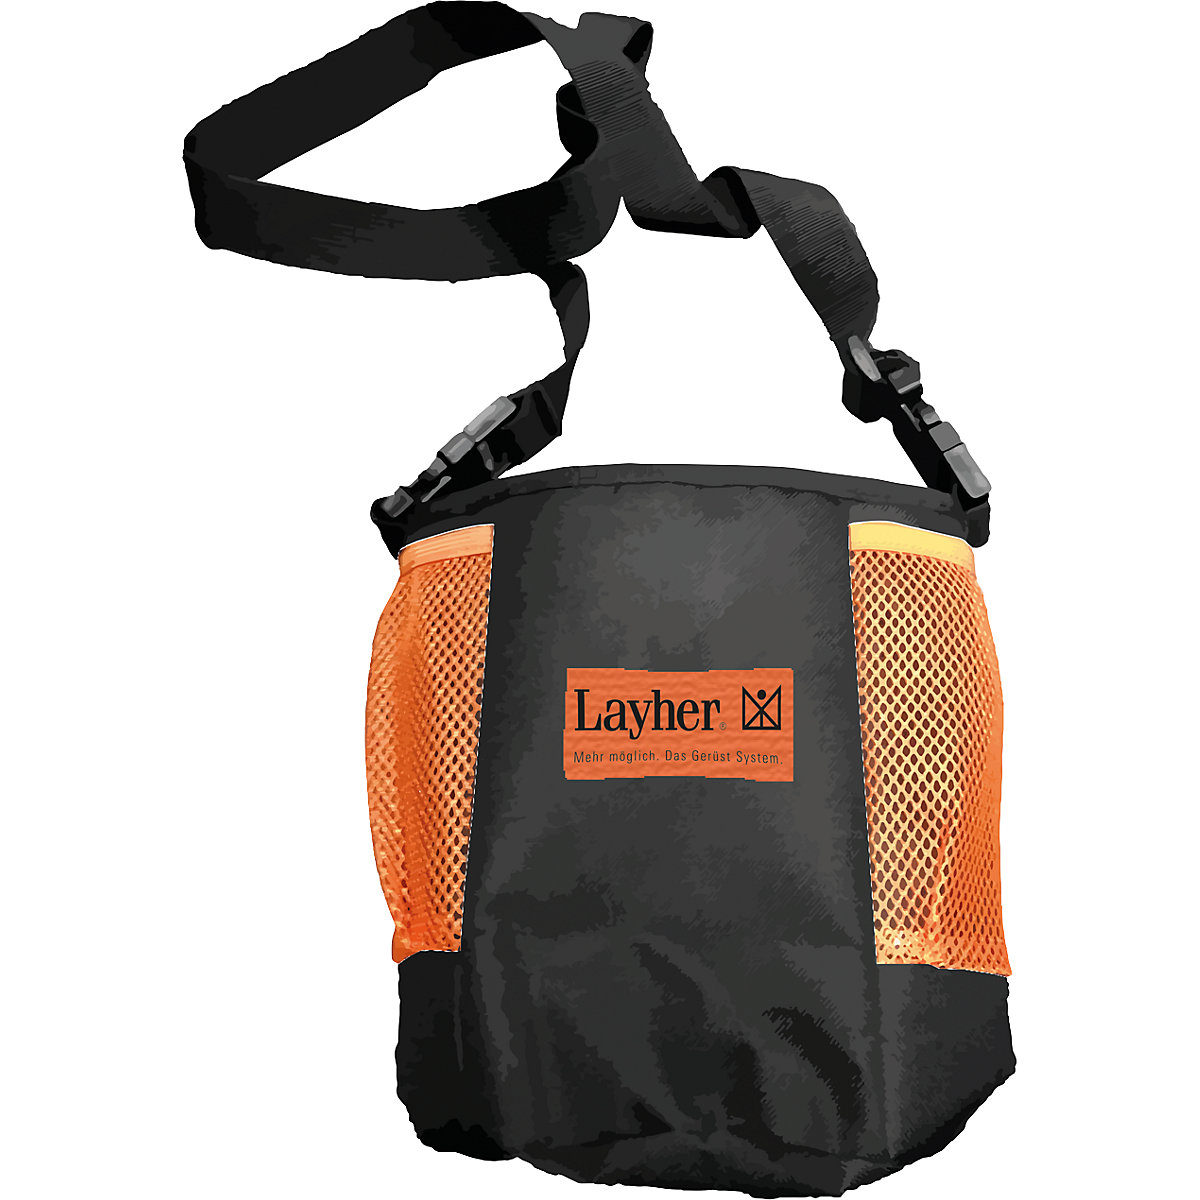 Assembly bag – Layher